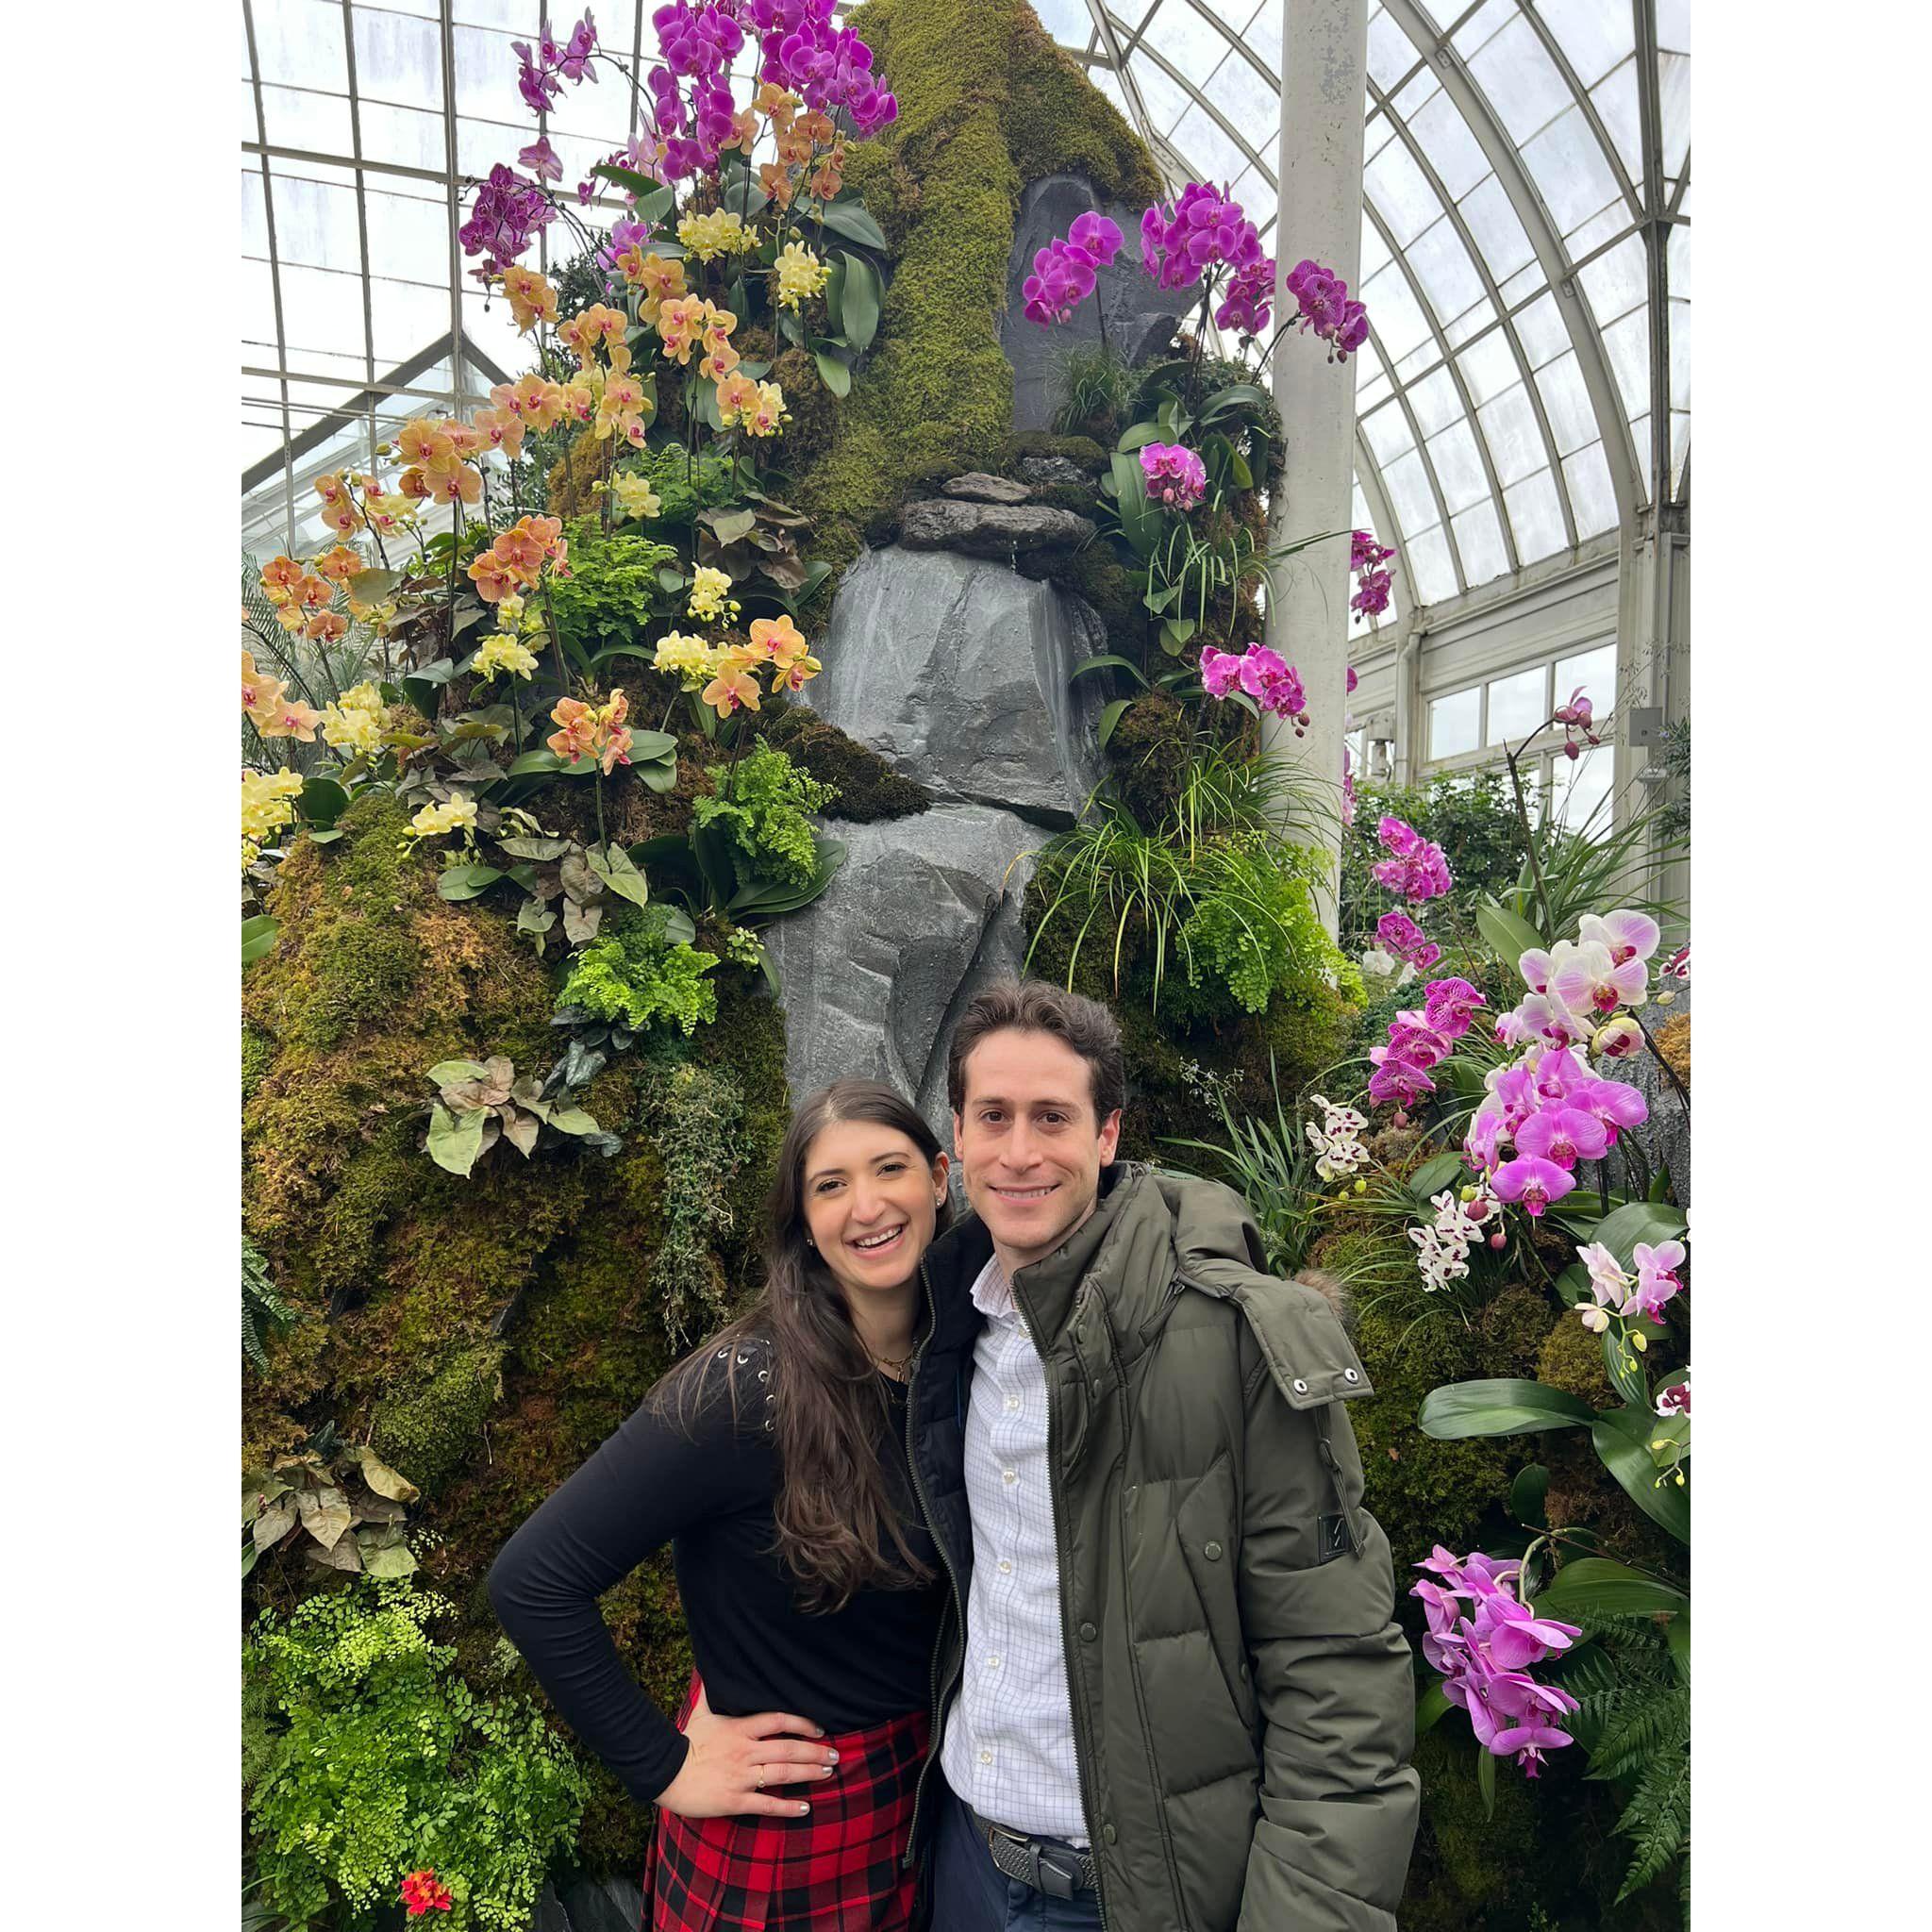 At the Orchid Show just mere minutes before we got engaged